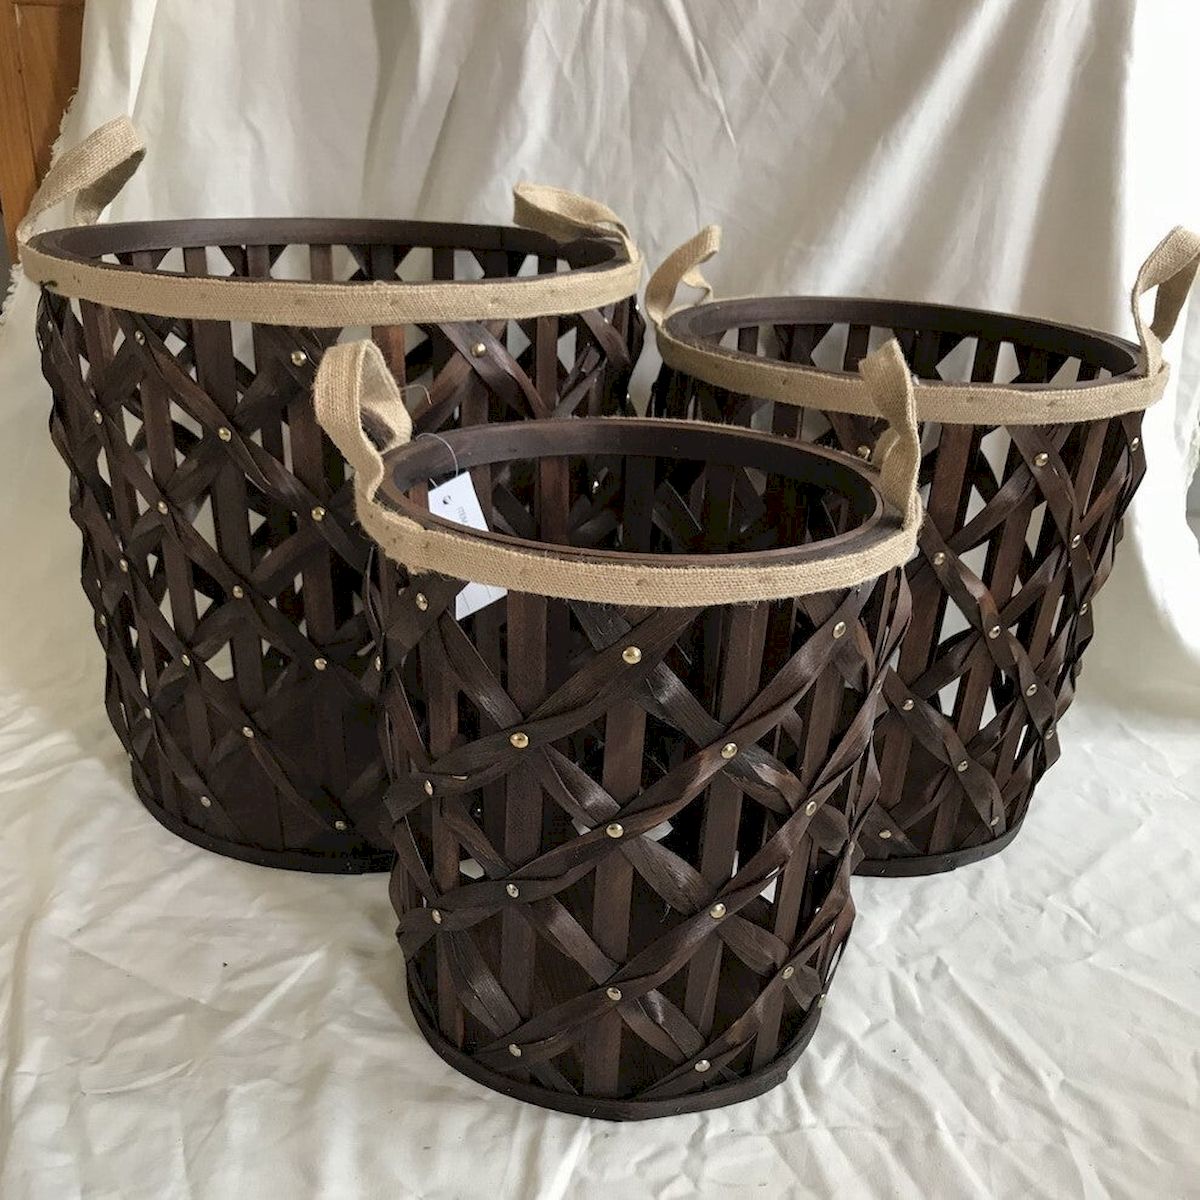 Mr. MJs Trading AI-3678-206 Brown Woven Wood with Fabric Handles Baskets, Set of 3